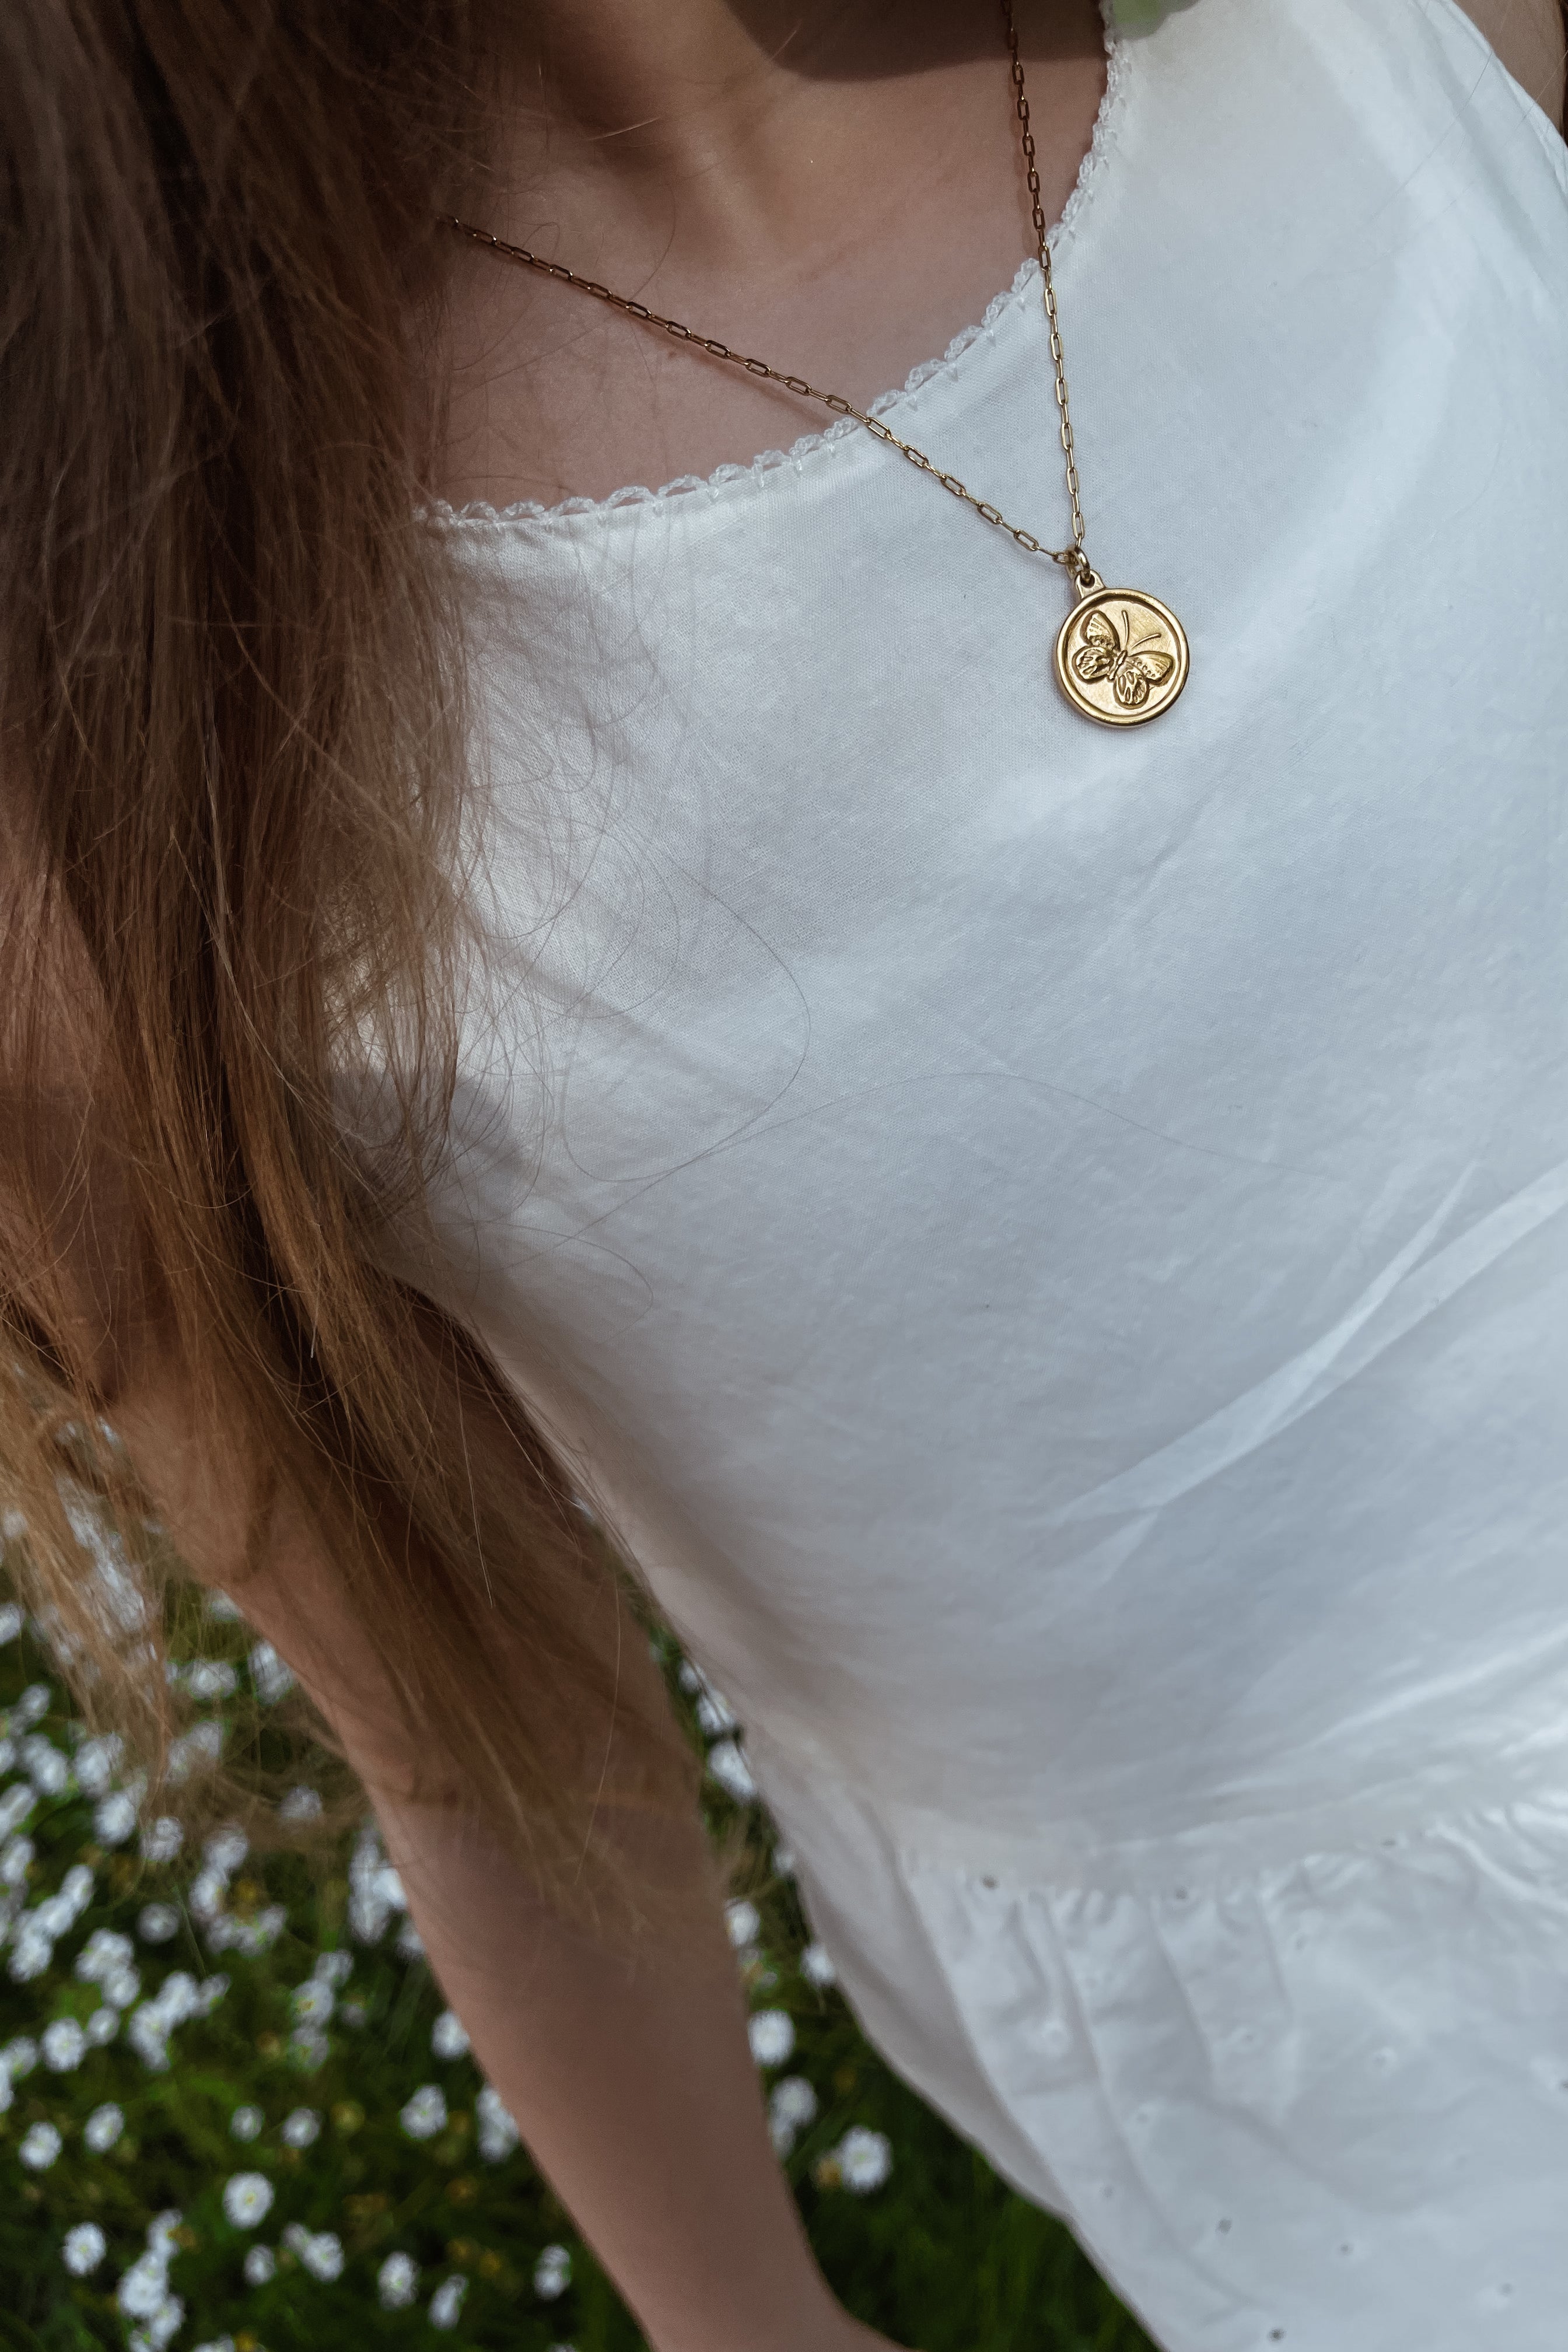 Verity (children) Necklace - Boutique Minimaliste has waterproof, durable, elegant and vintage inspired jewelry